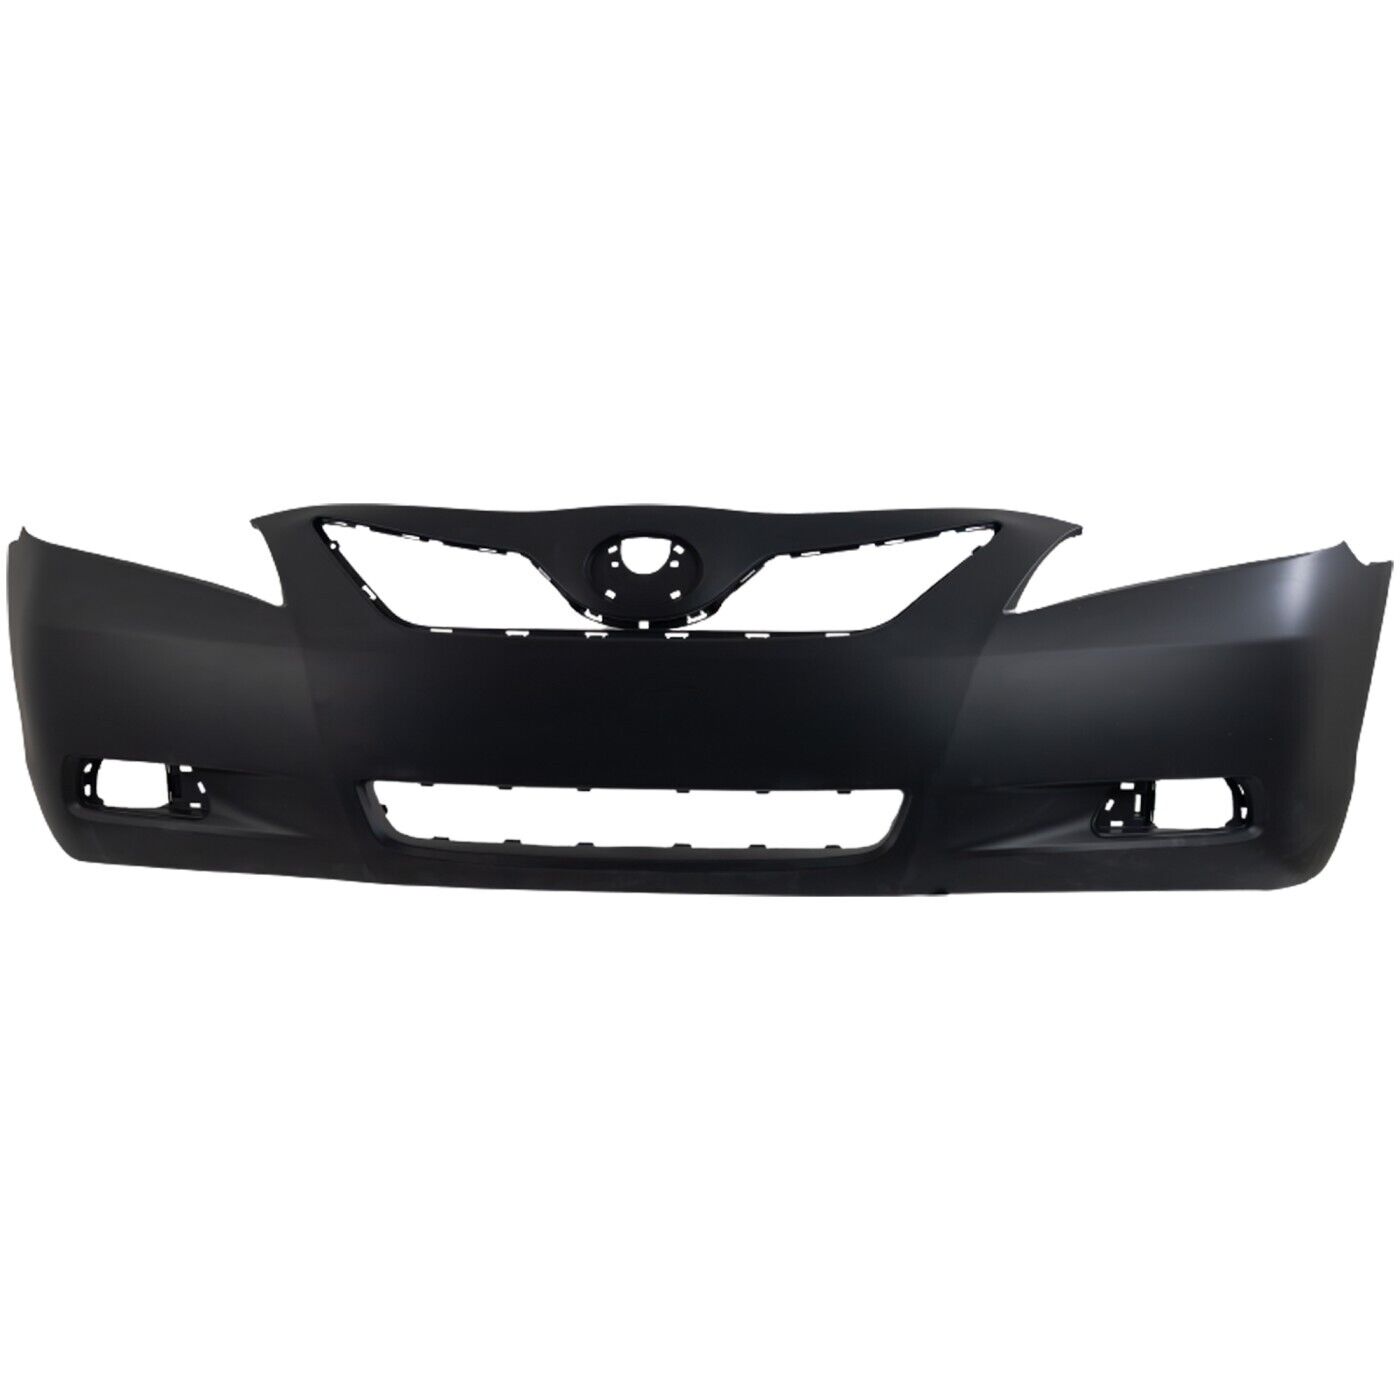 Front Bumper Cover For 2007-2009 Toyota Camry USA Built Primed CAPA 5211906919